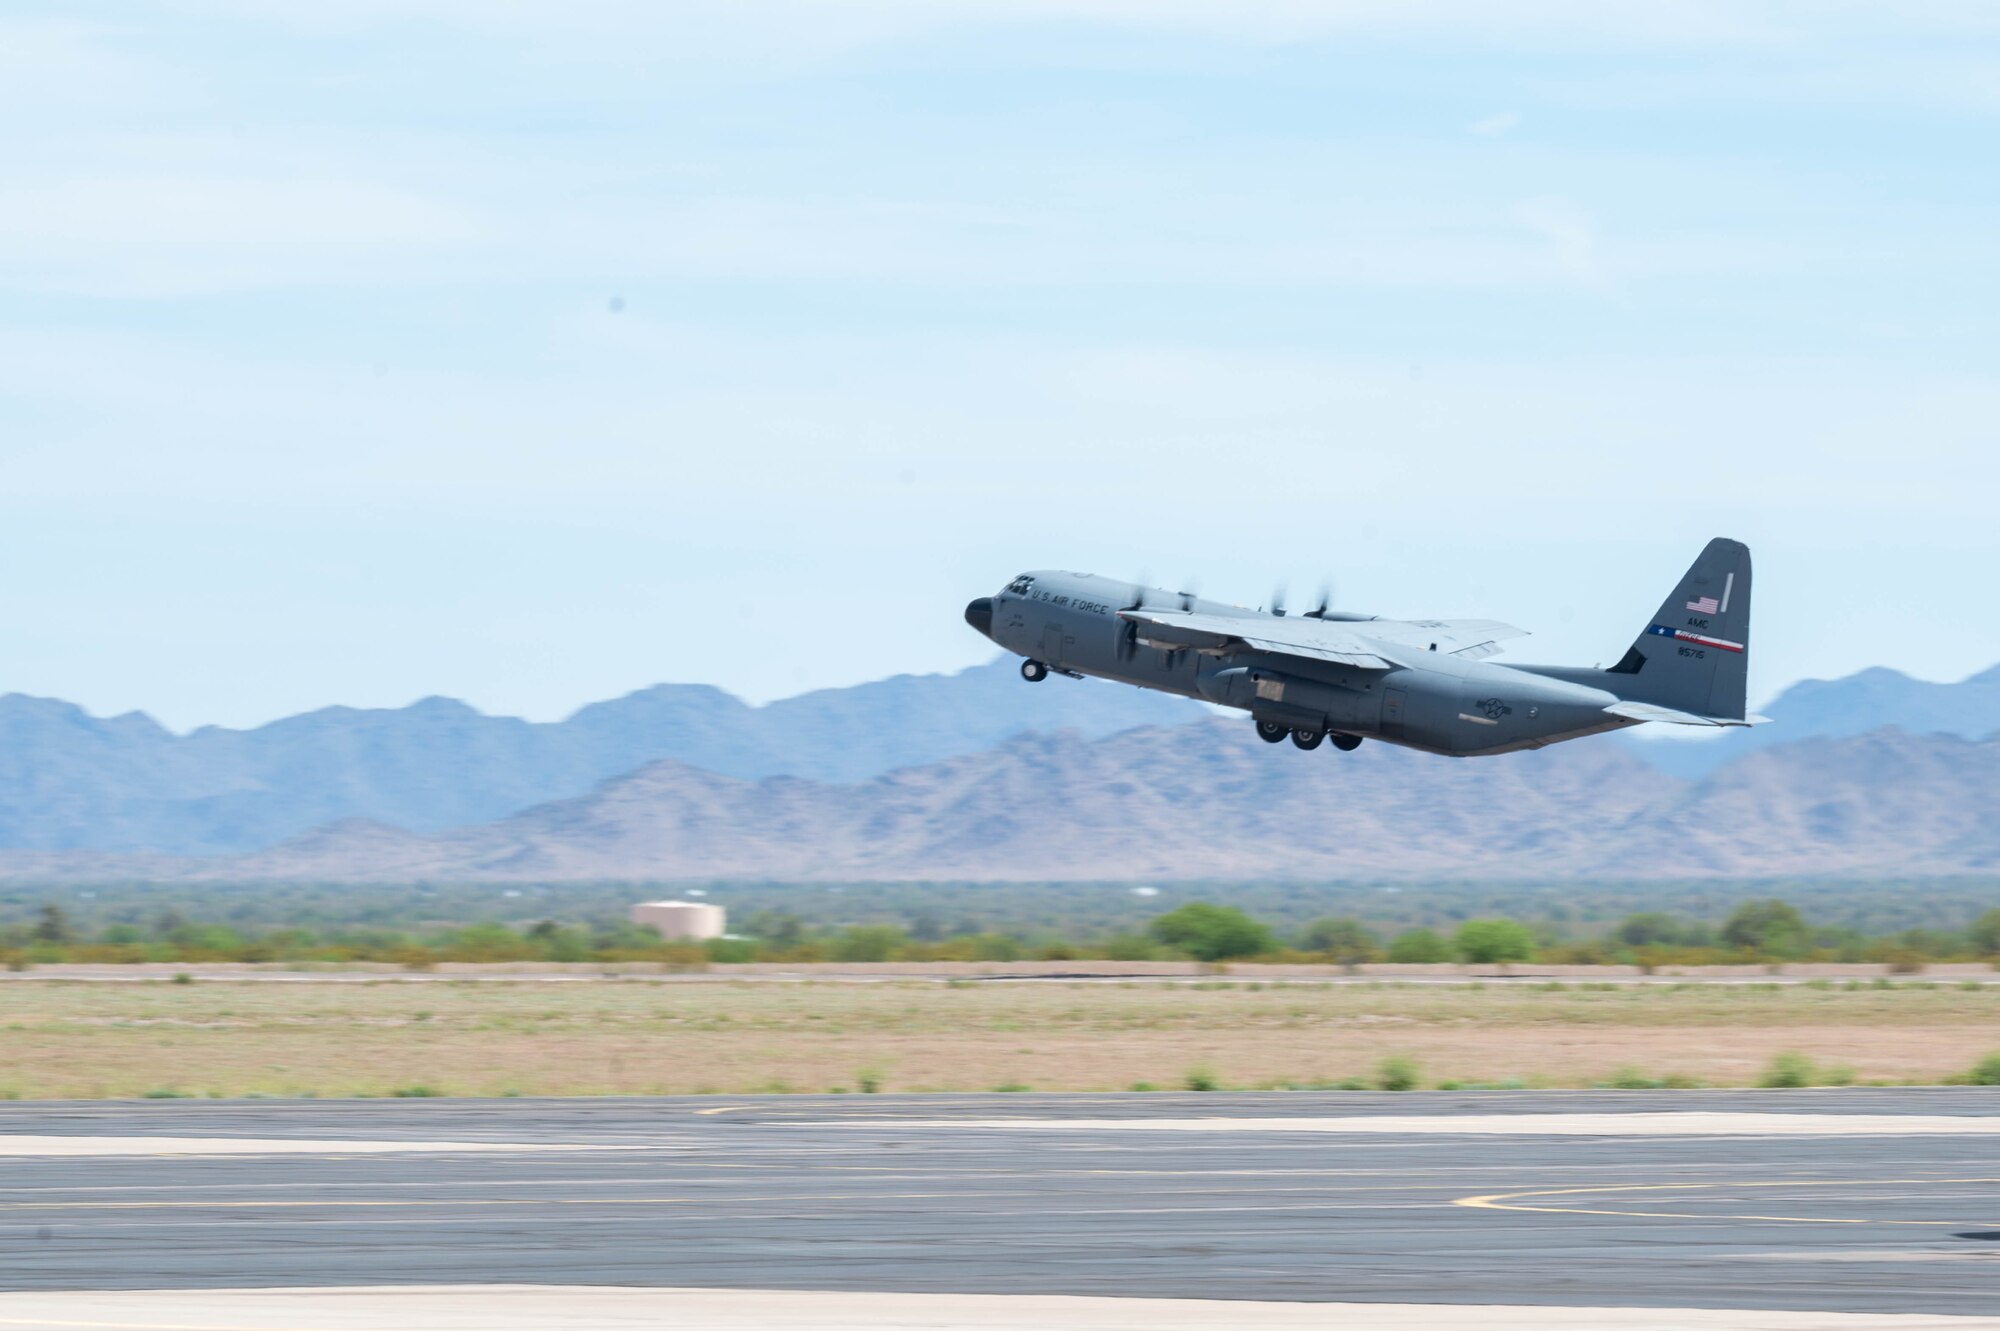 A U.S. Air Force C-130J Super Hercules aircraft assigned to the 317th Airlift Wing, Dyess Air Force Base, Texas, takes off during exercise Wild Coyote, April 12, 2023, at Gila Bend Air Force Auxiliary Field, Arizona.